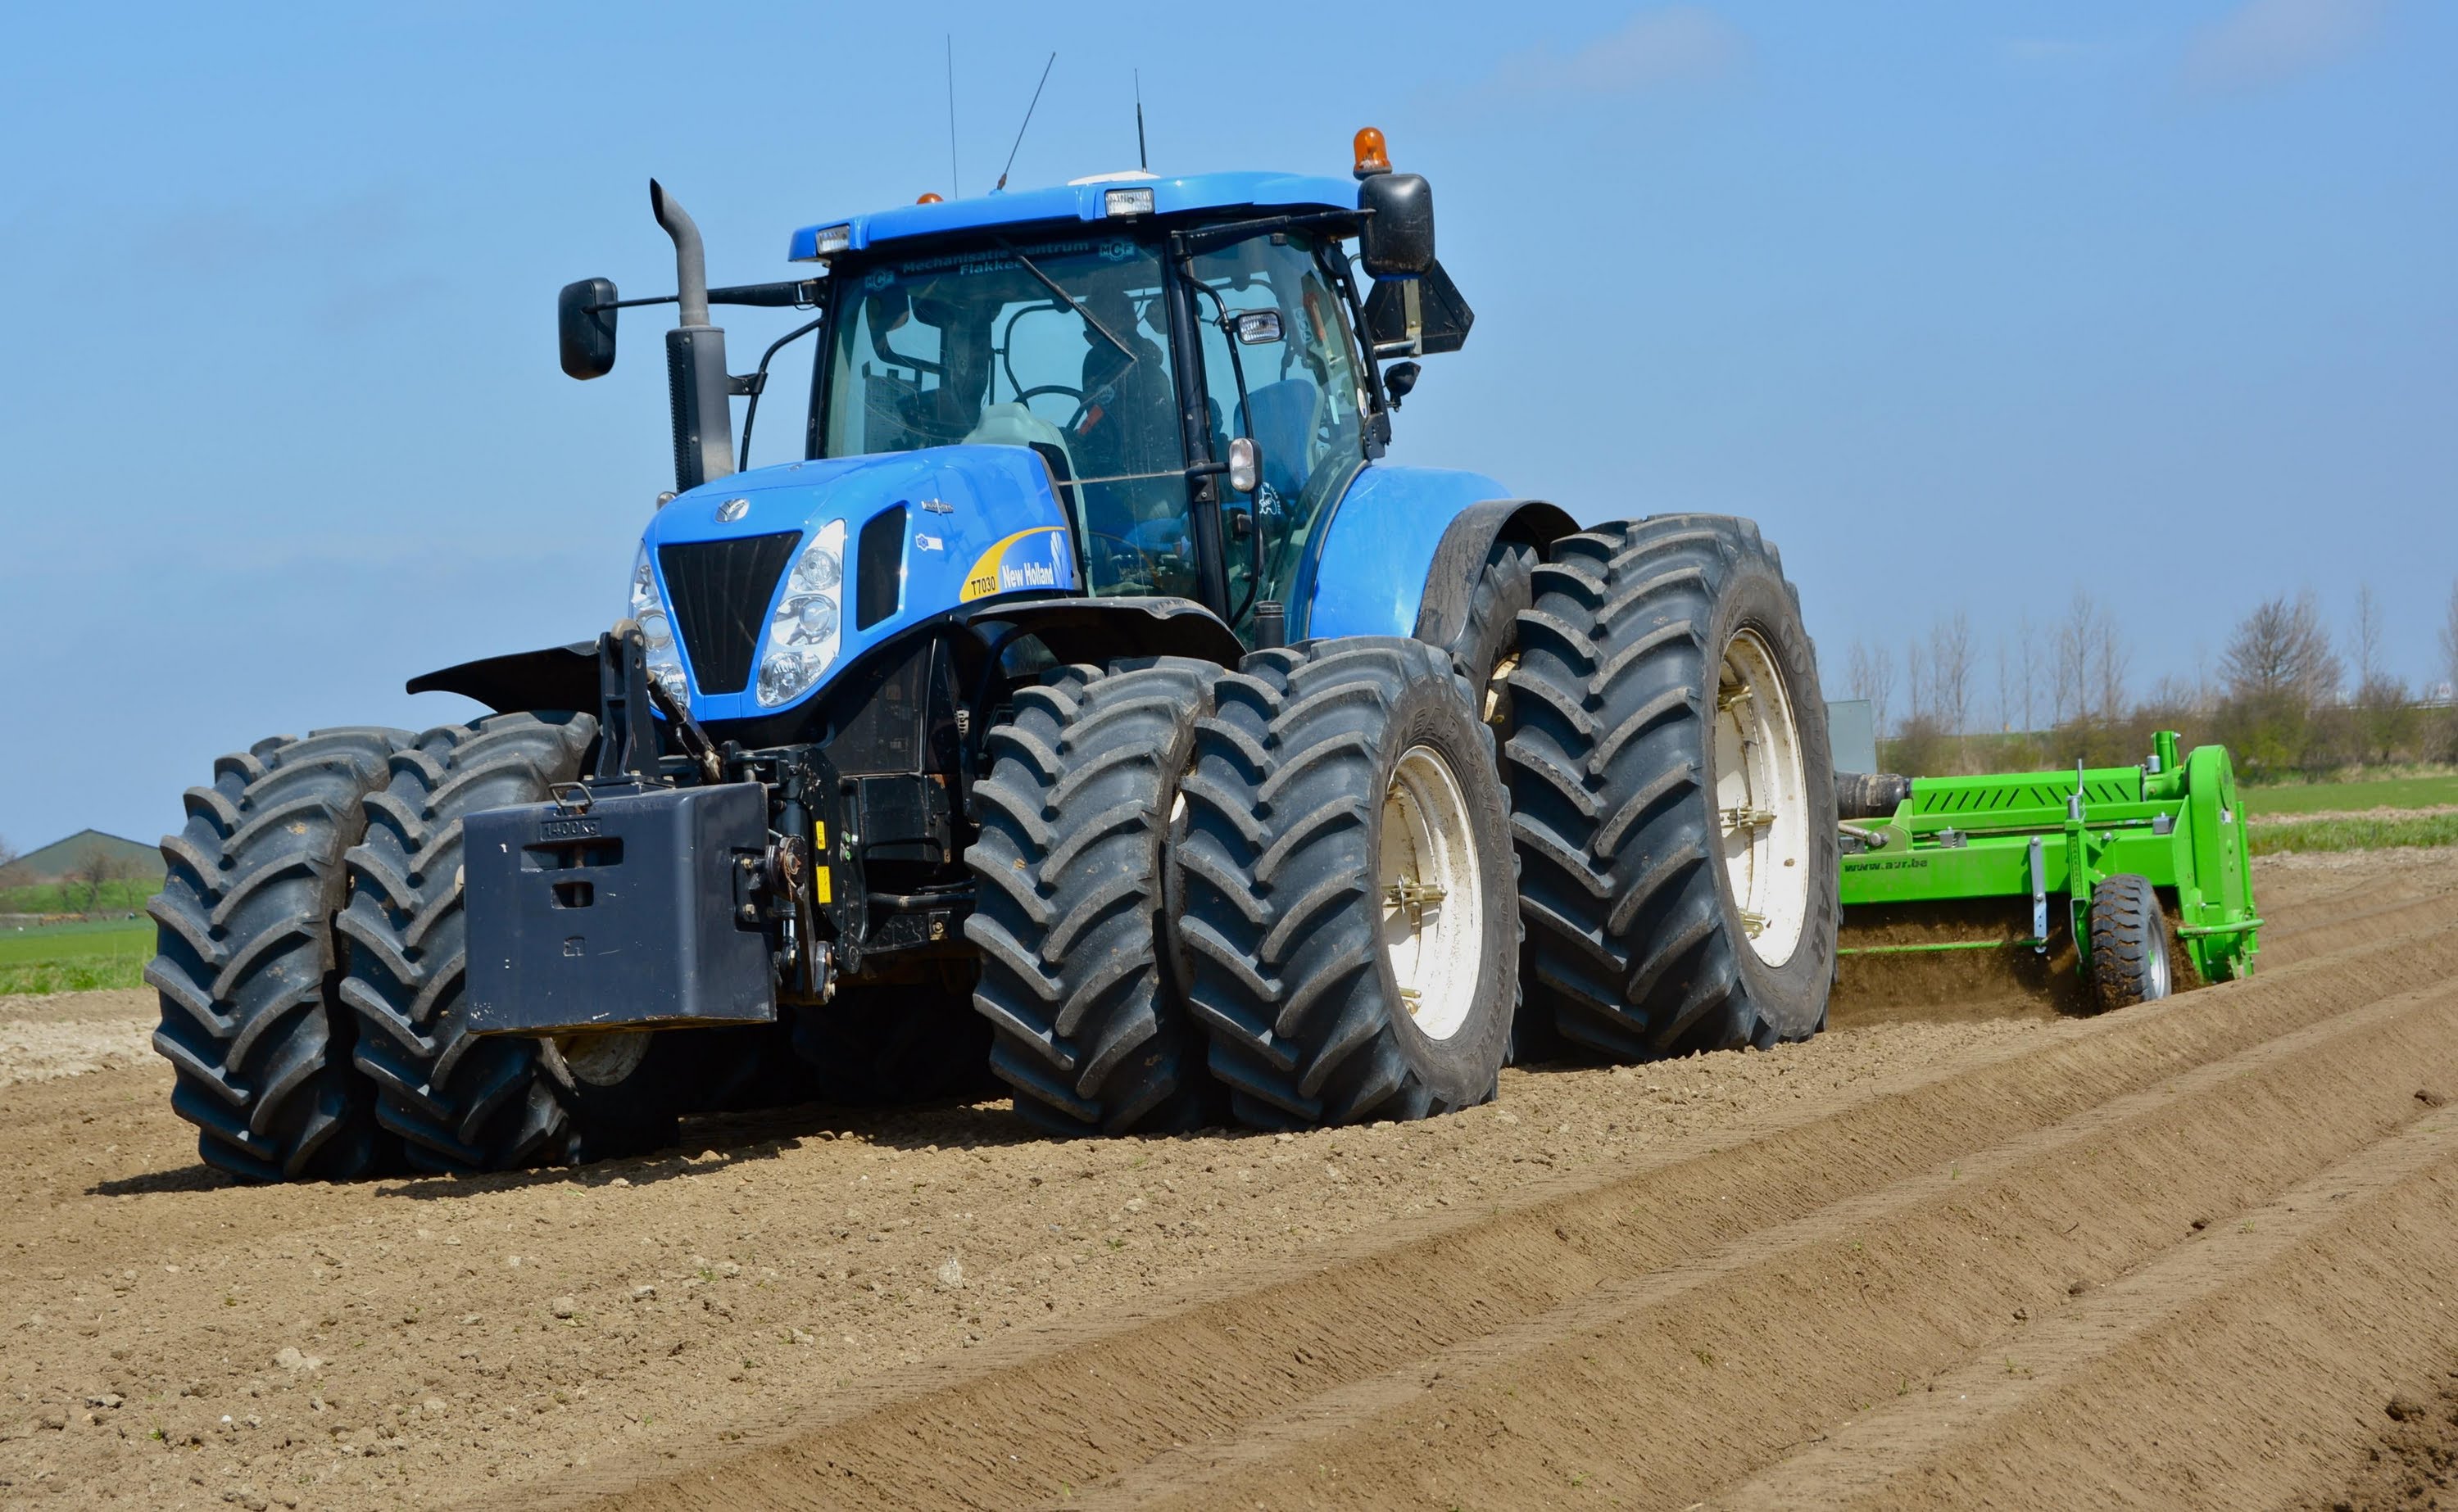 New Holland Backgrounds, Compatible - PC, Mobile, Gadgets| 3000x1846 px